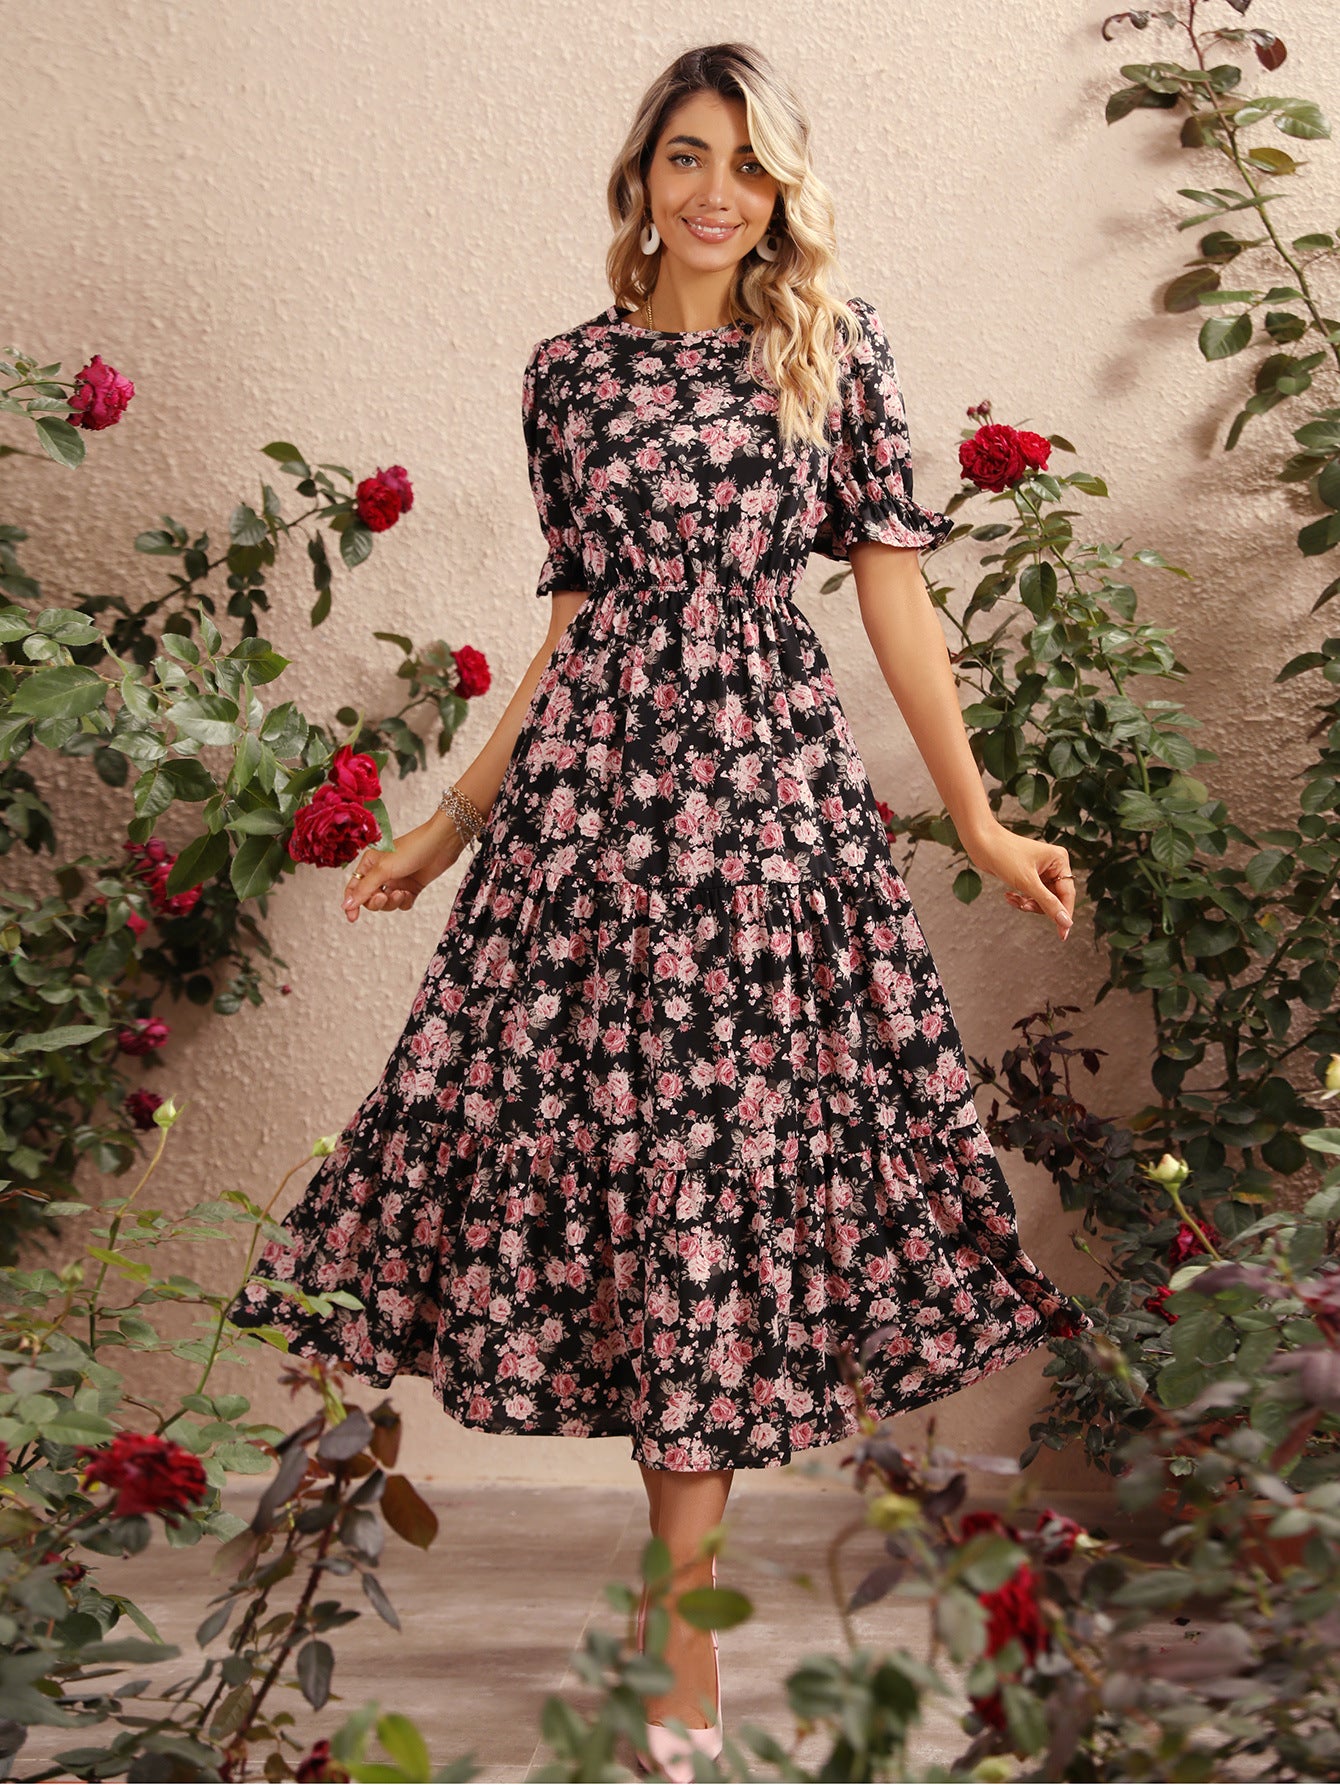 Spring Waist Controlled Floral Dress Women Clothing